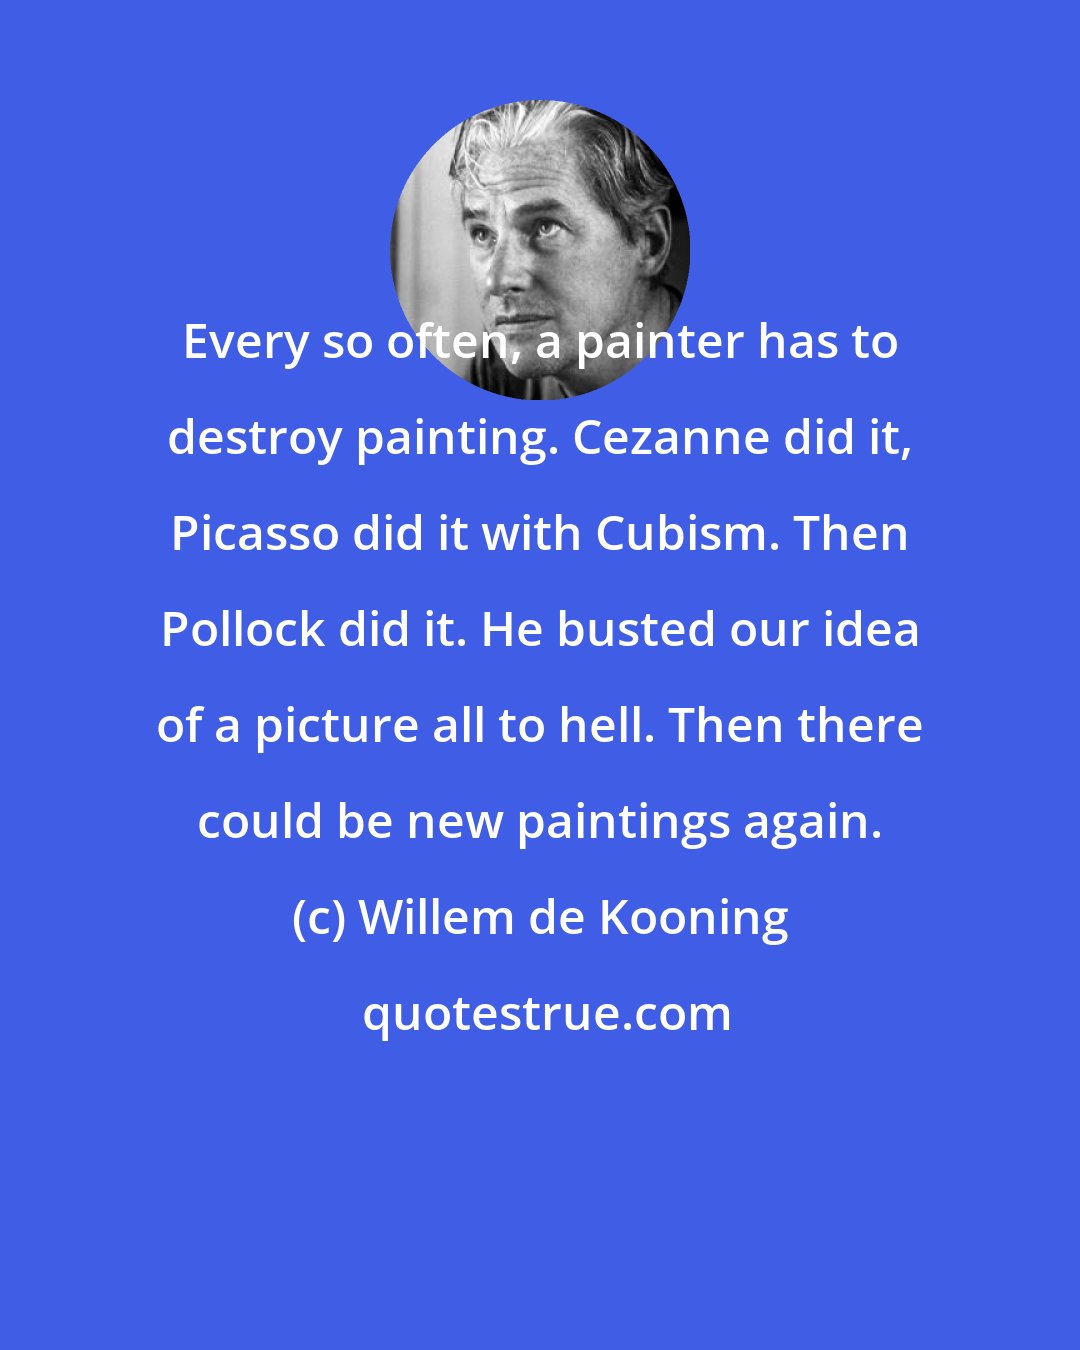 Willem de Kooning: Every so often, a painter has to destroy painting. Cezanne did it, Picasso did it with Cubism. Then Pollock did it. He busted our idea of a picture all to hell. Then there could be new paintings again.